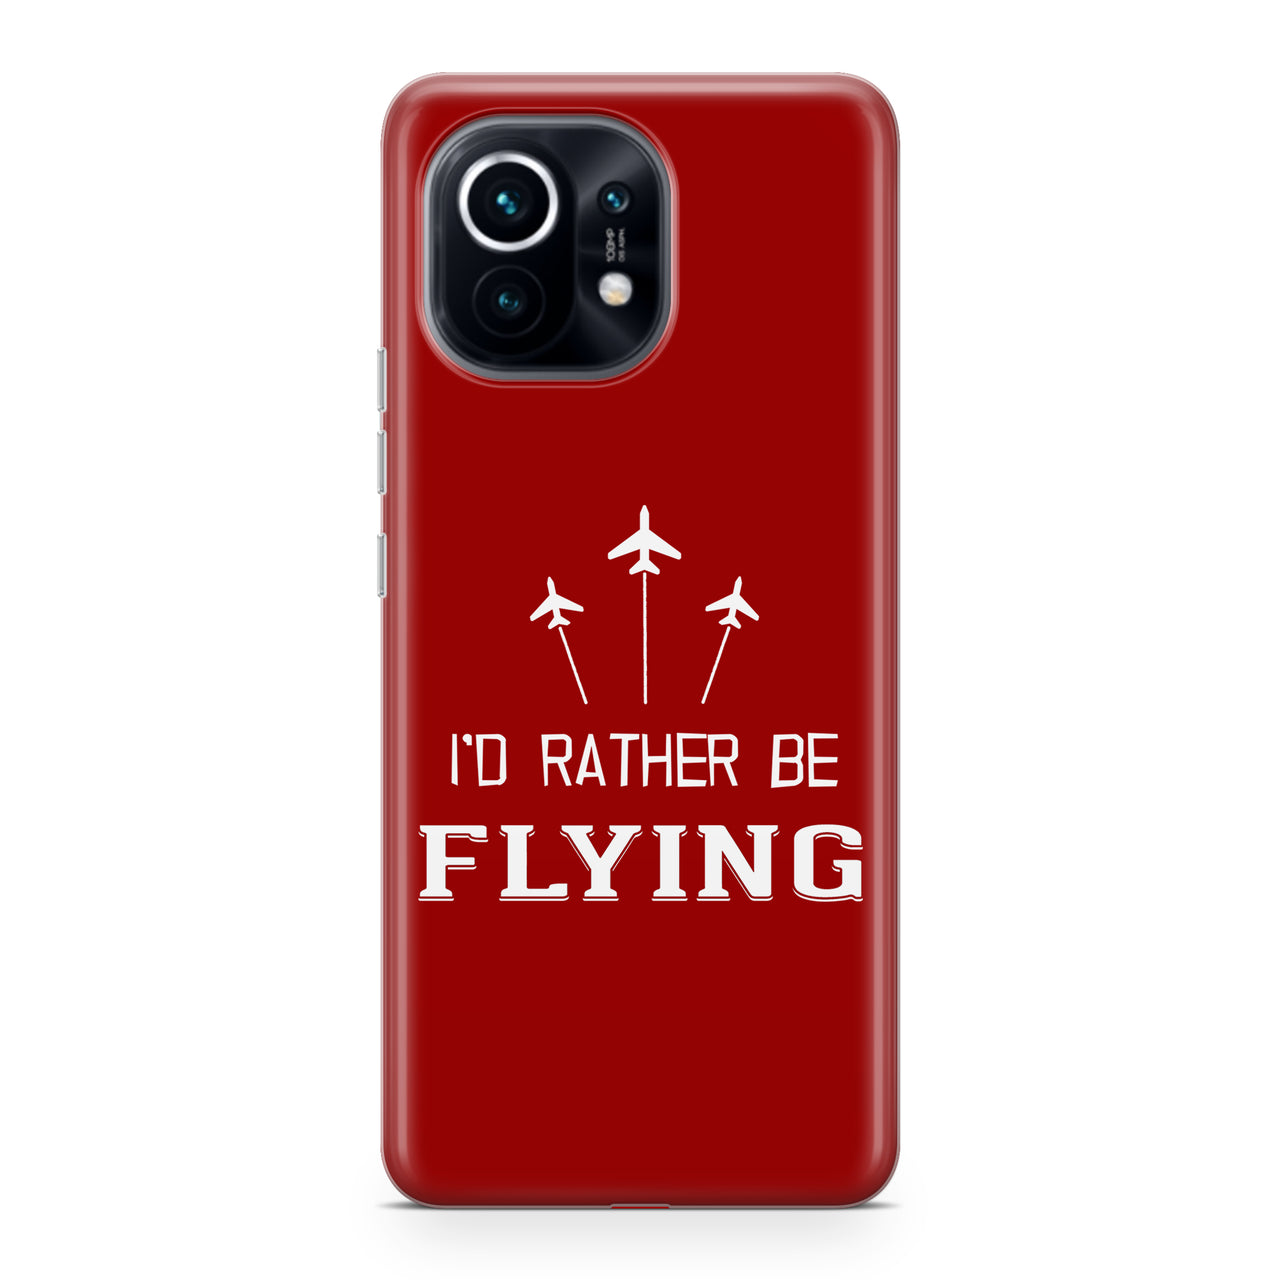 I'D Rather Be Flying Designed Xiaomi Cases